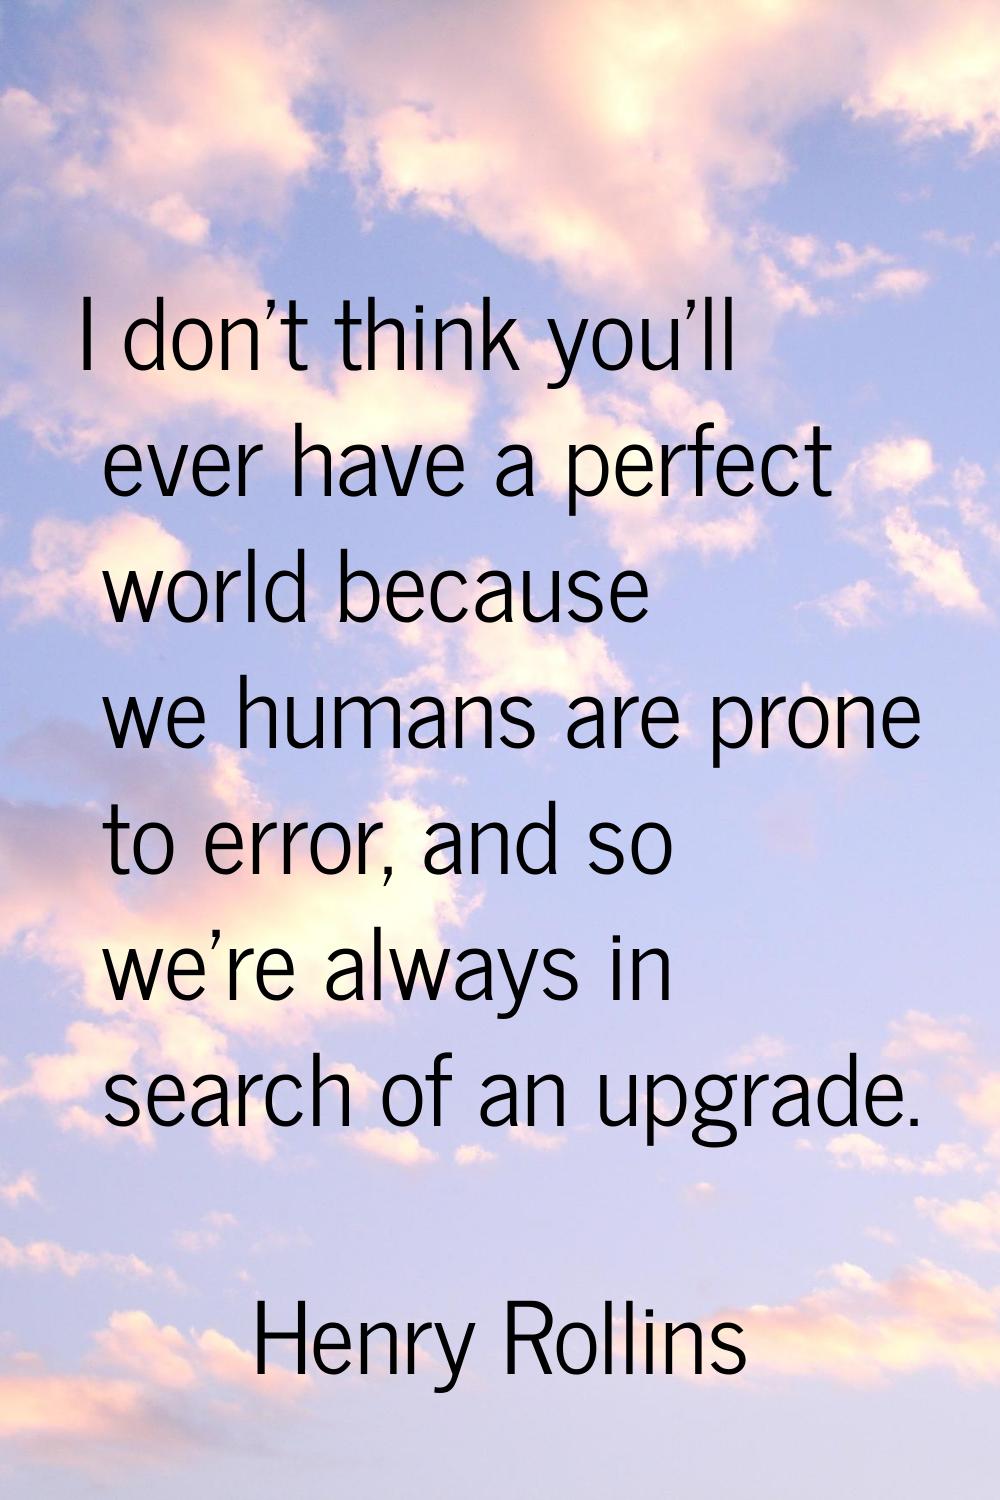 I don't think you'll ever have a perfect world because we humans are prone to error, and so we're a